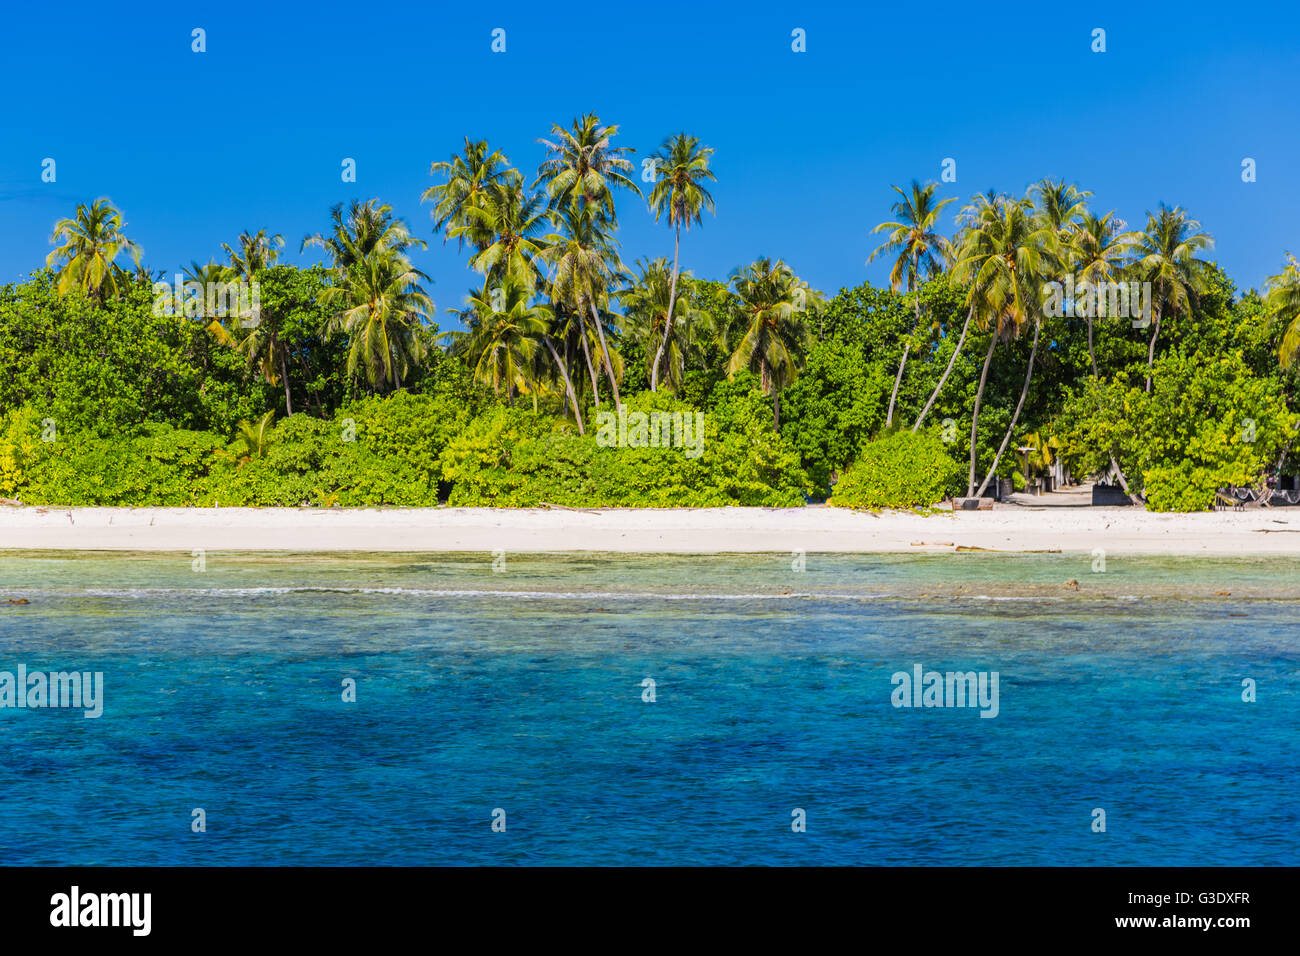 Beautiful beach in Maldives. Summer holiday travel concept. Stock Photo